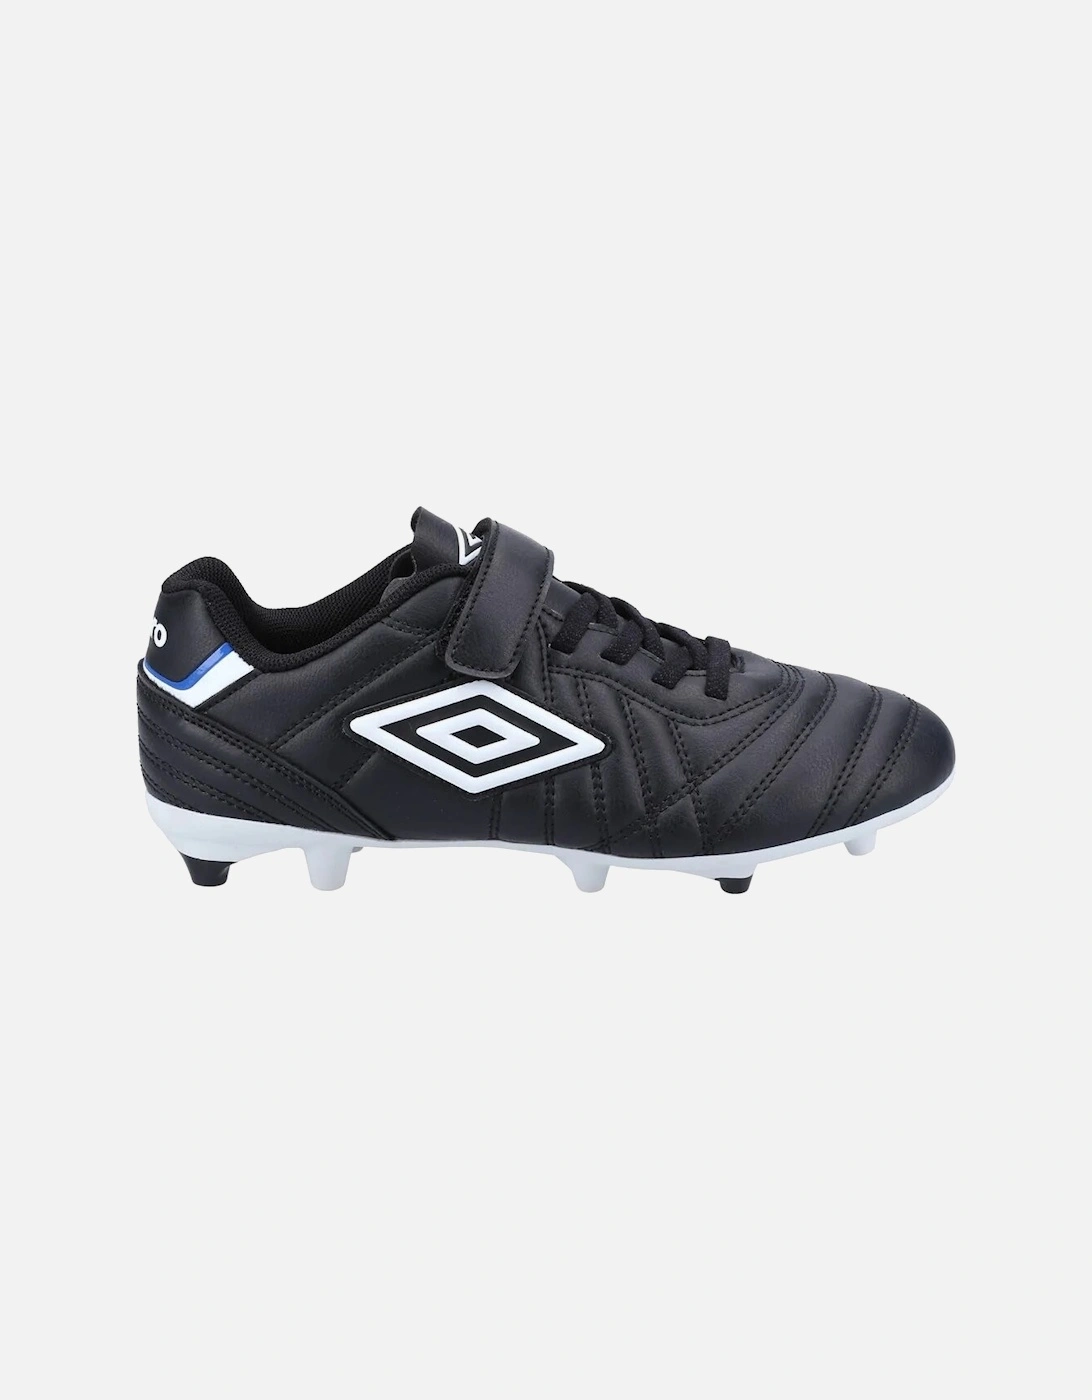 Childrens/Kids Speciali Liga Firm Leather Football Boots